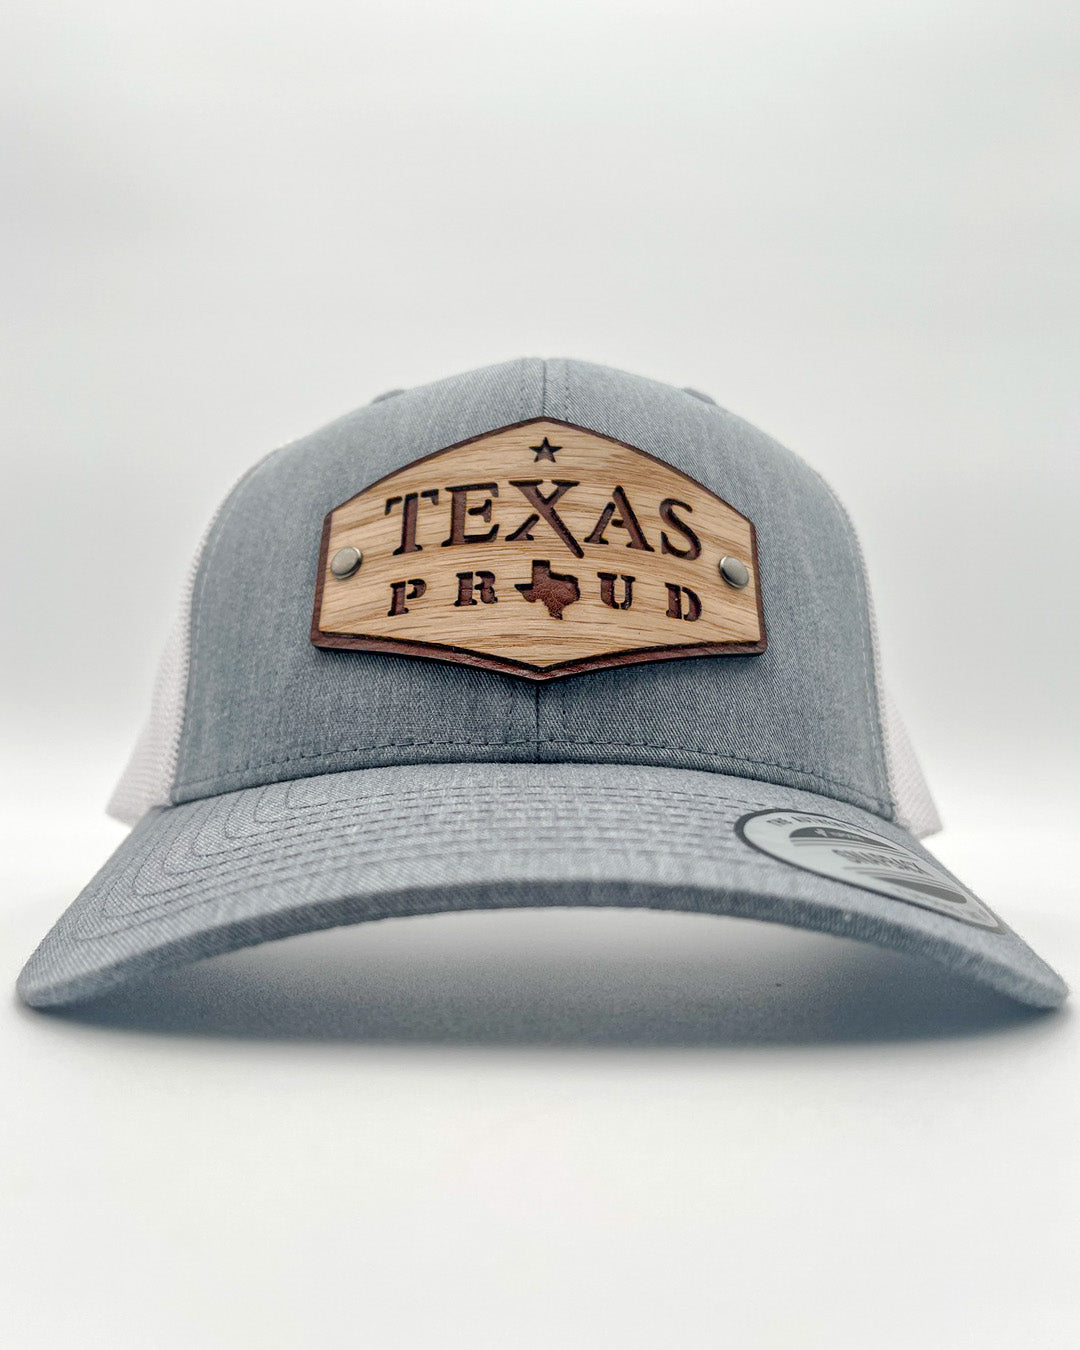 Affordable Custom Hats & Caps Cheap Original Texas Proud Edition Real Wood & Leather Patch Hat Retro Trucker Mesh Cap